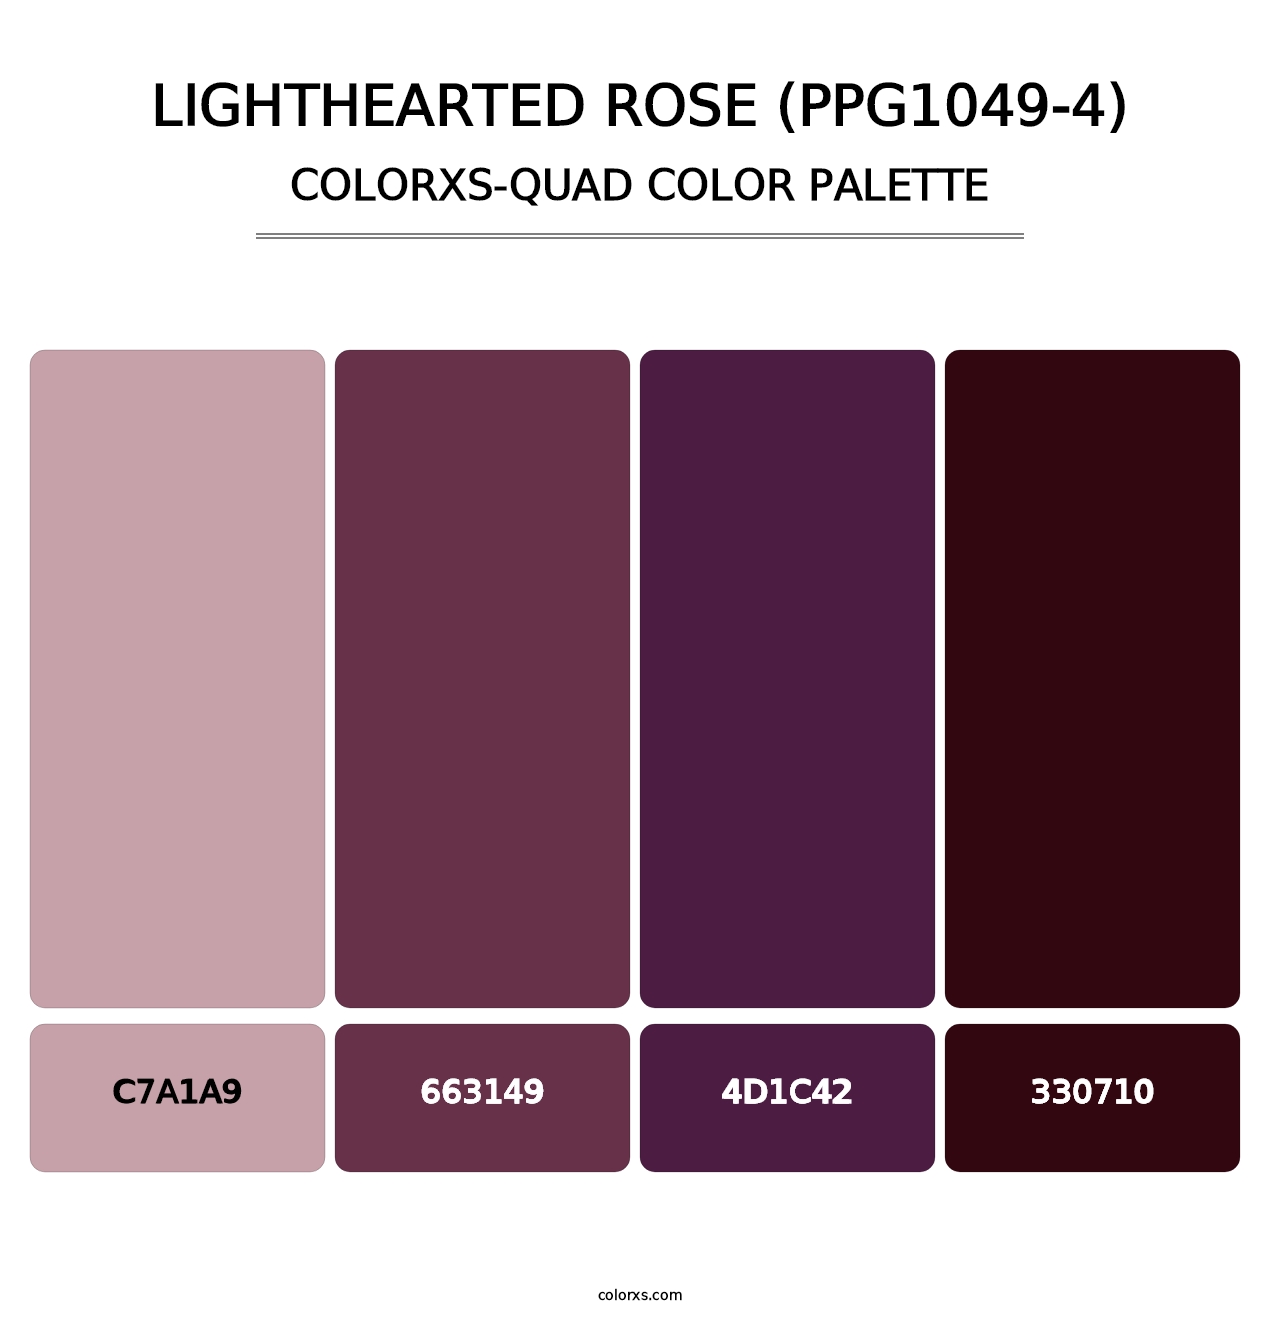 Lighthearted Rose (PPG1049-4) - Colorxs Quad Palette